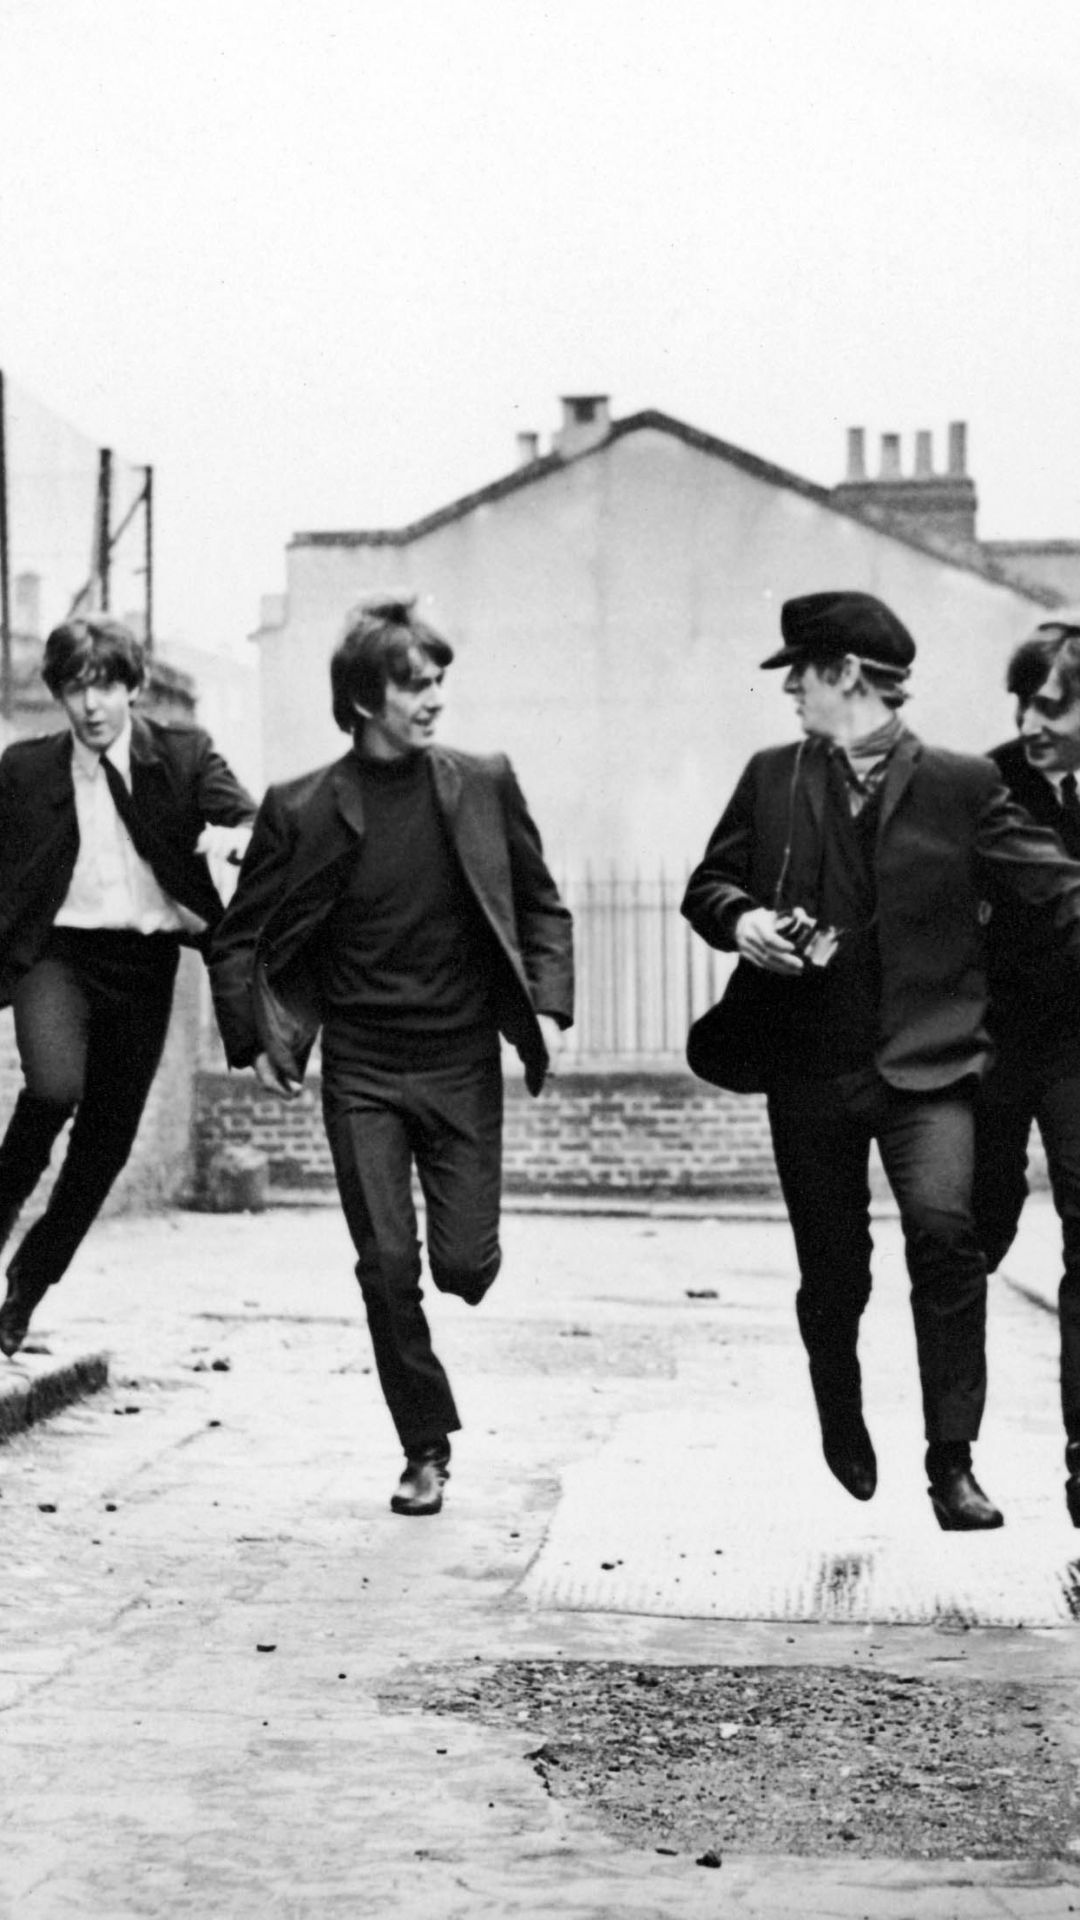 The Beatles Wallpaper for IPhone 6S /7 /8 [Retina HD]